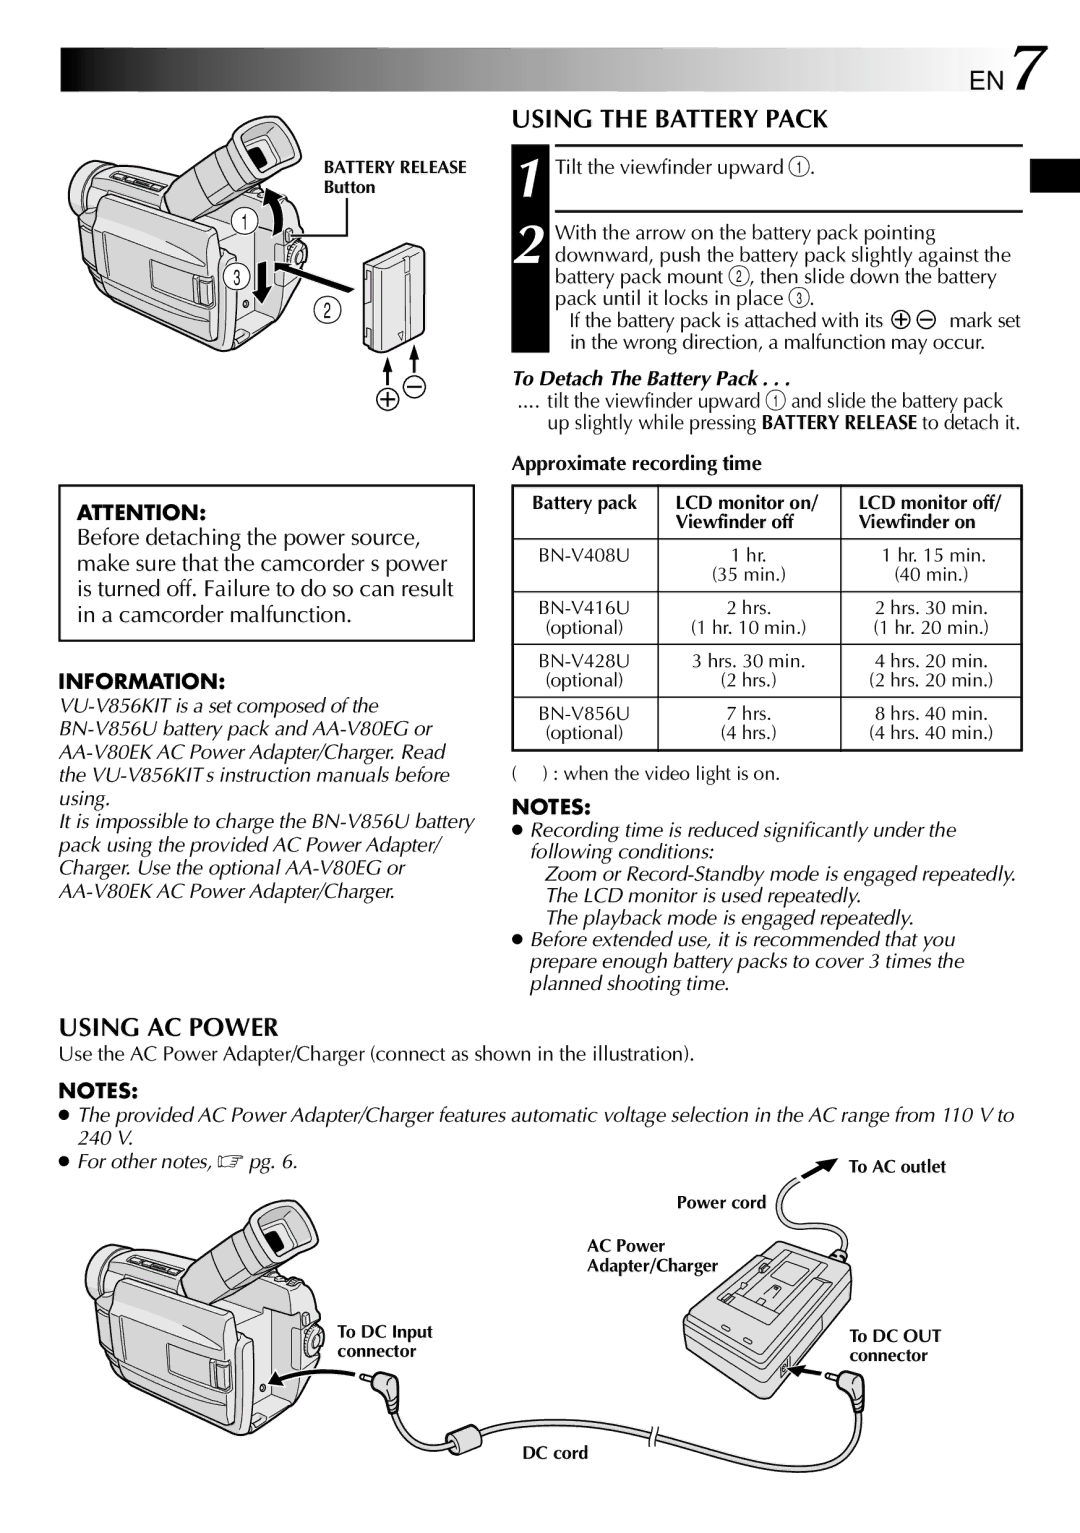 JVC LYT0583-001A Using the Battery Pack, Using AC Power, Information, To Detach The Battery Pack, For other notes,  pg 